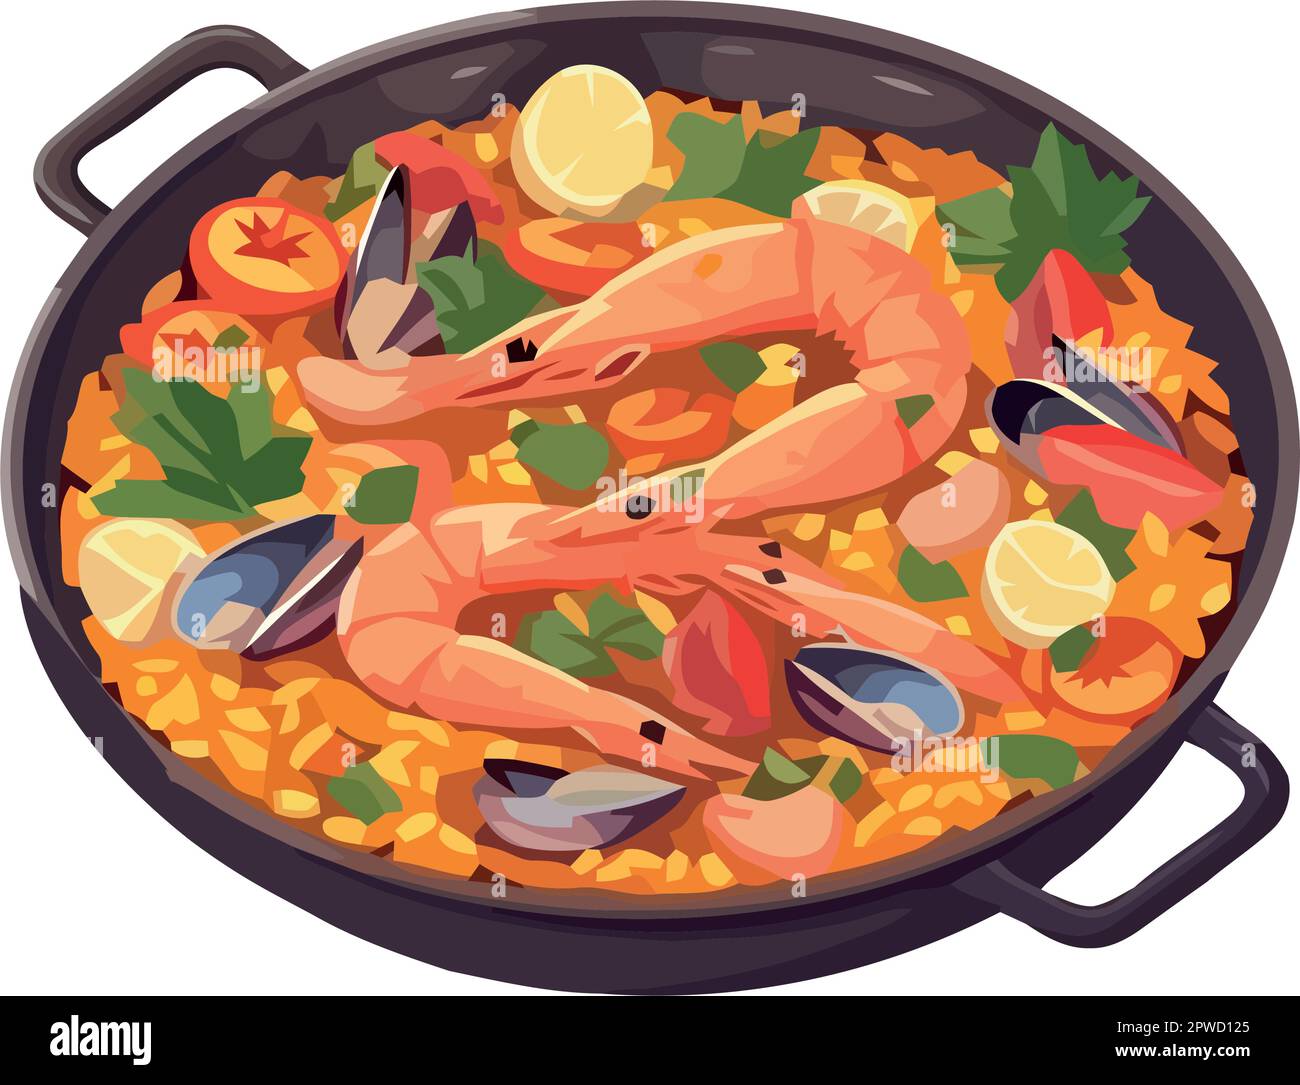 Gourmet seafood paella cooked with fresh vegetables Stock Vector